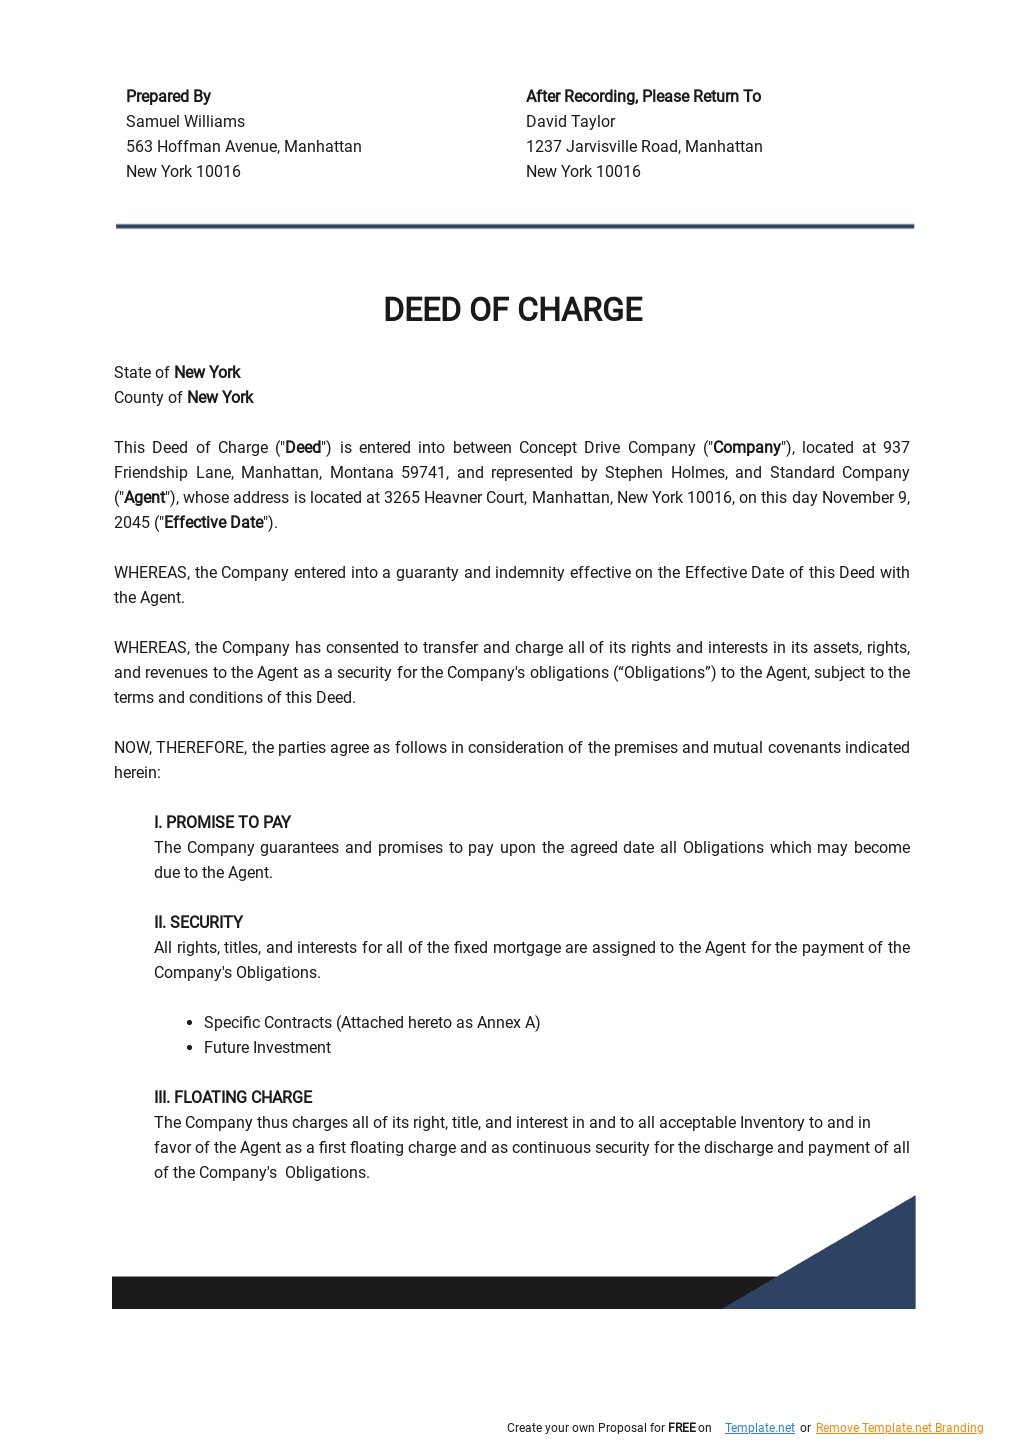 Deed of Charge Template